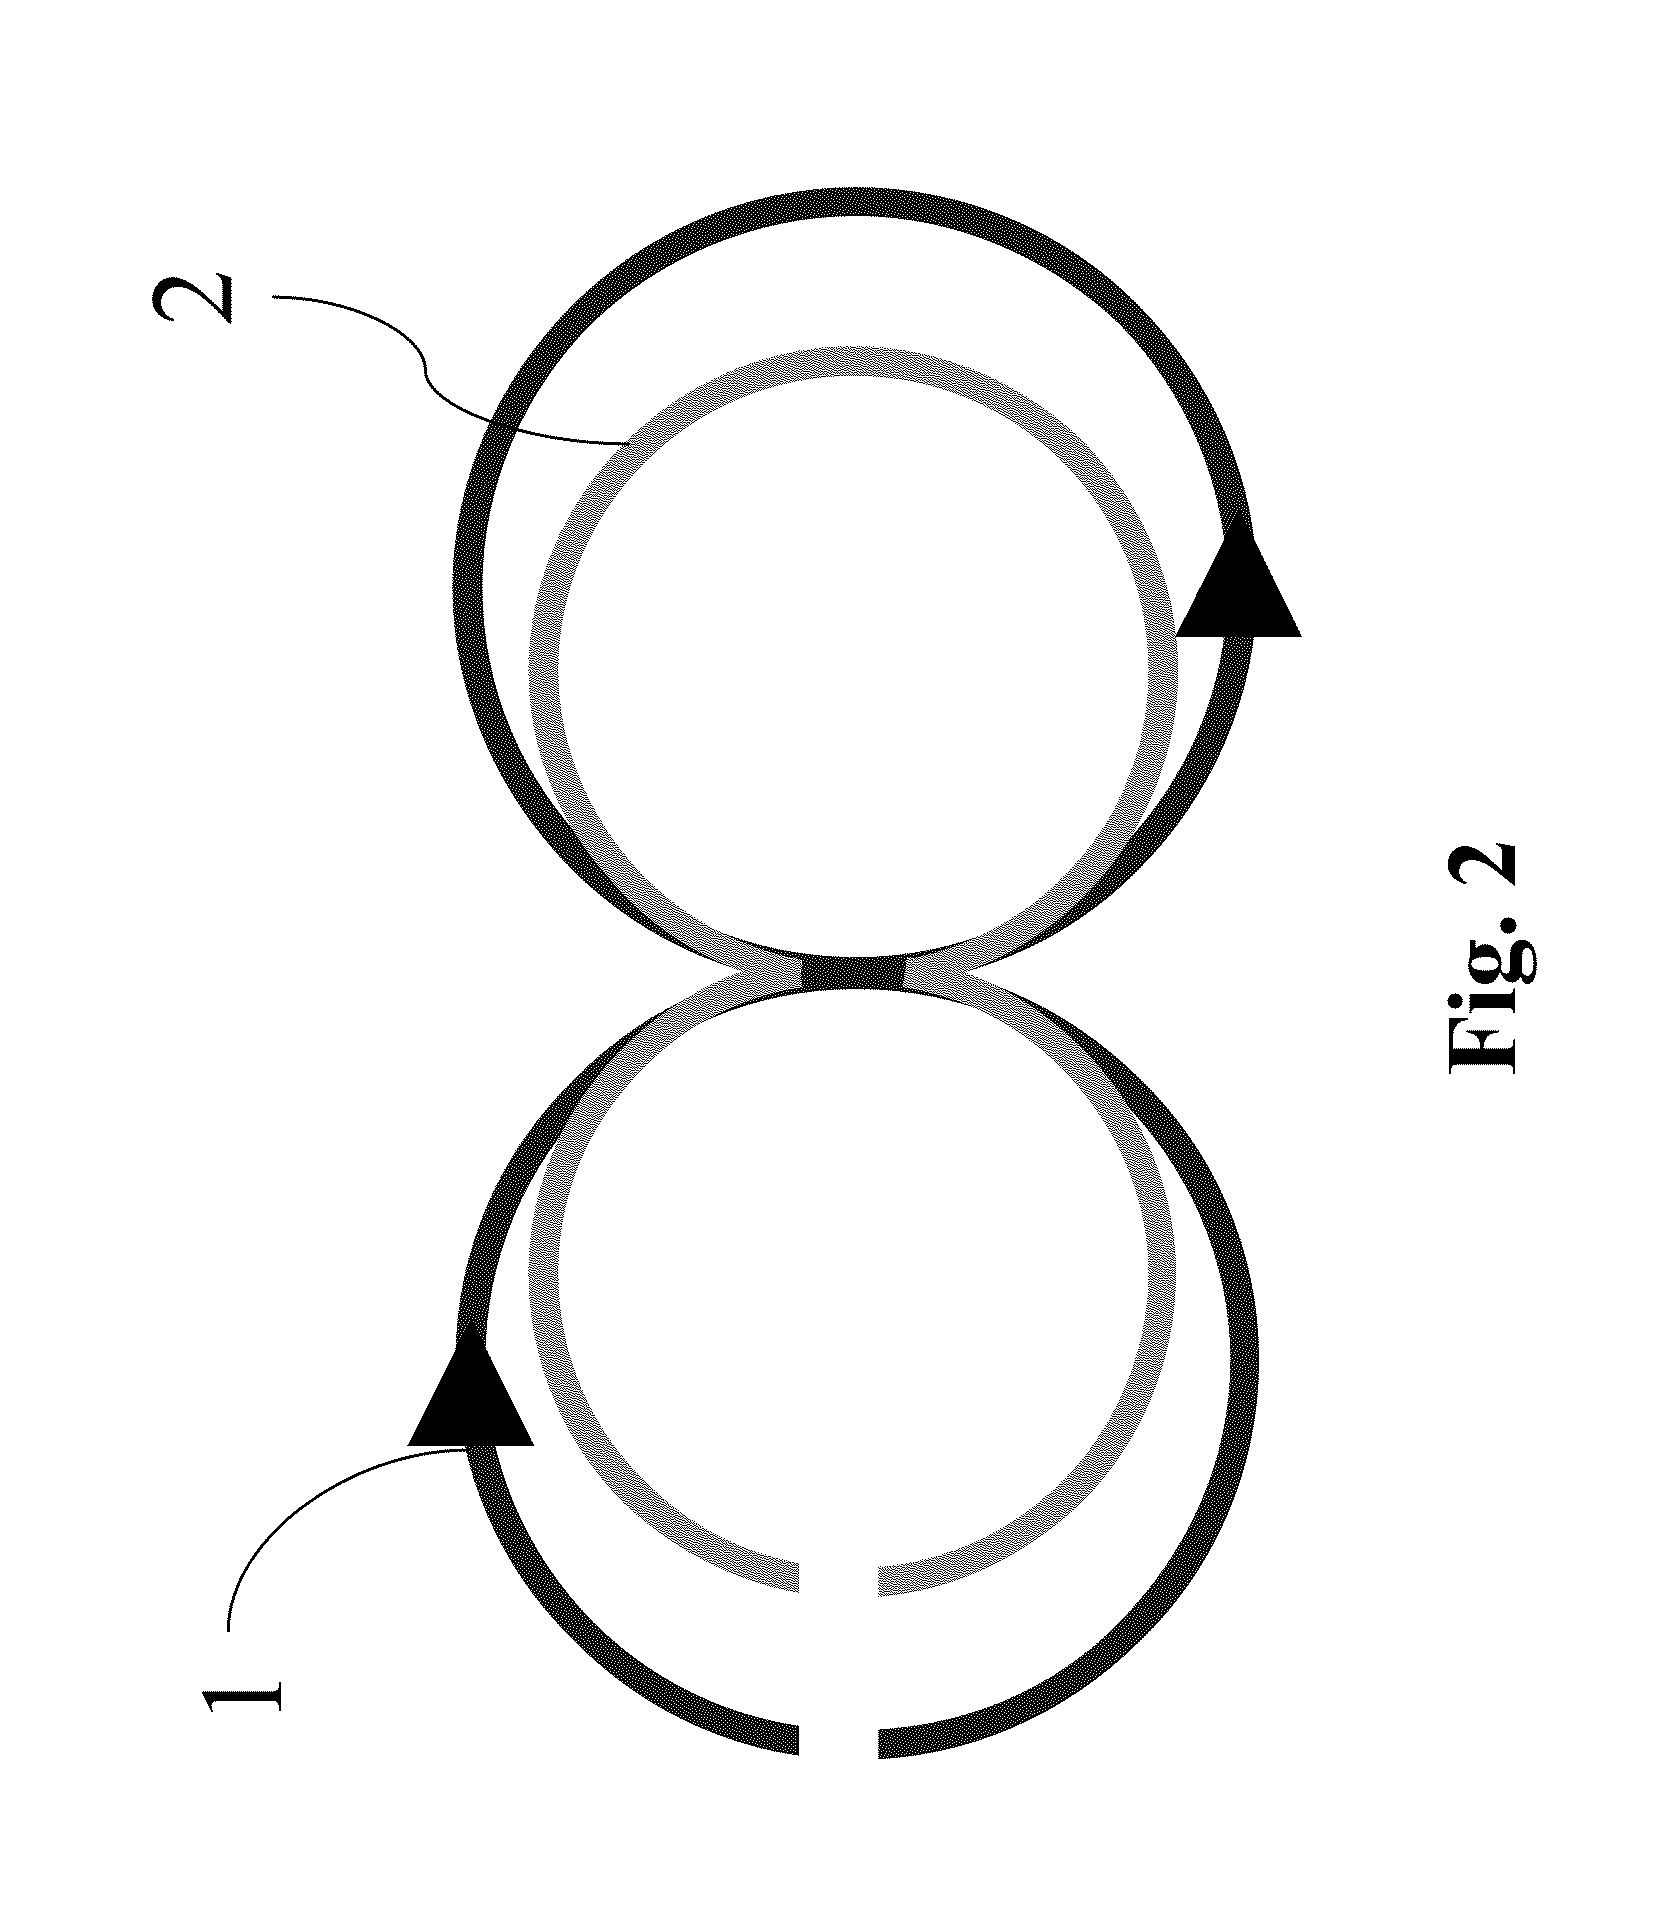 Magnetic stimulation coils with electrically conducting structures